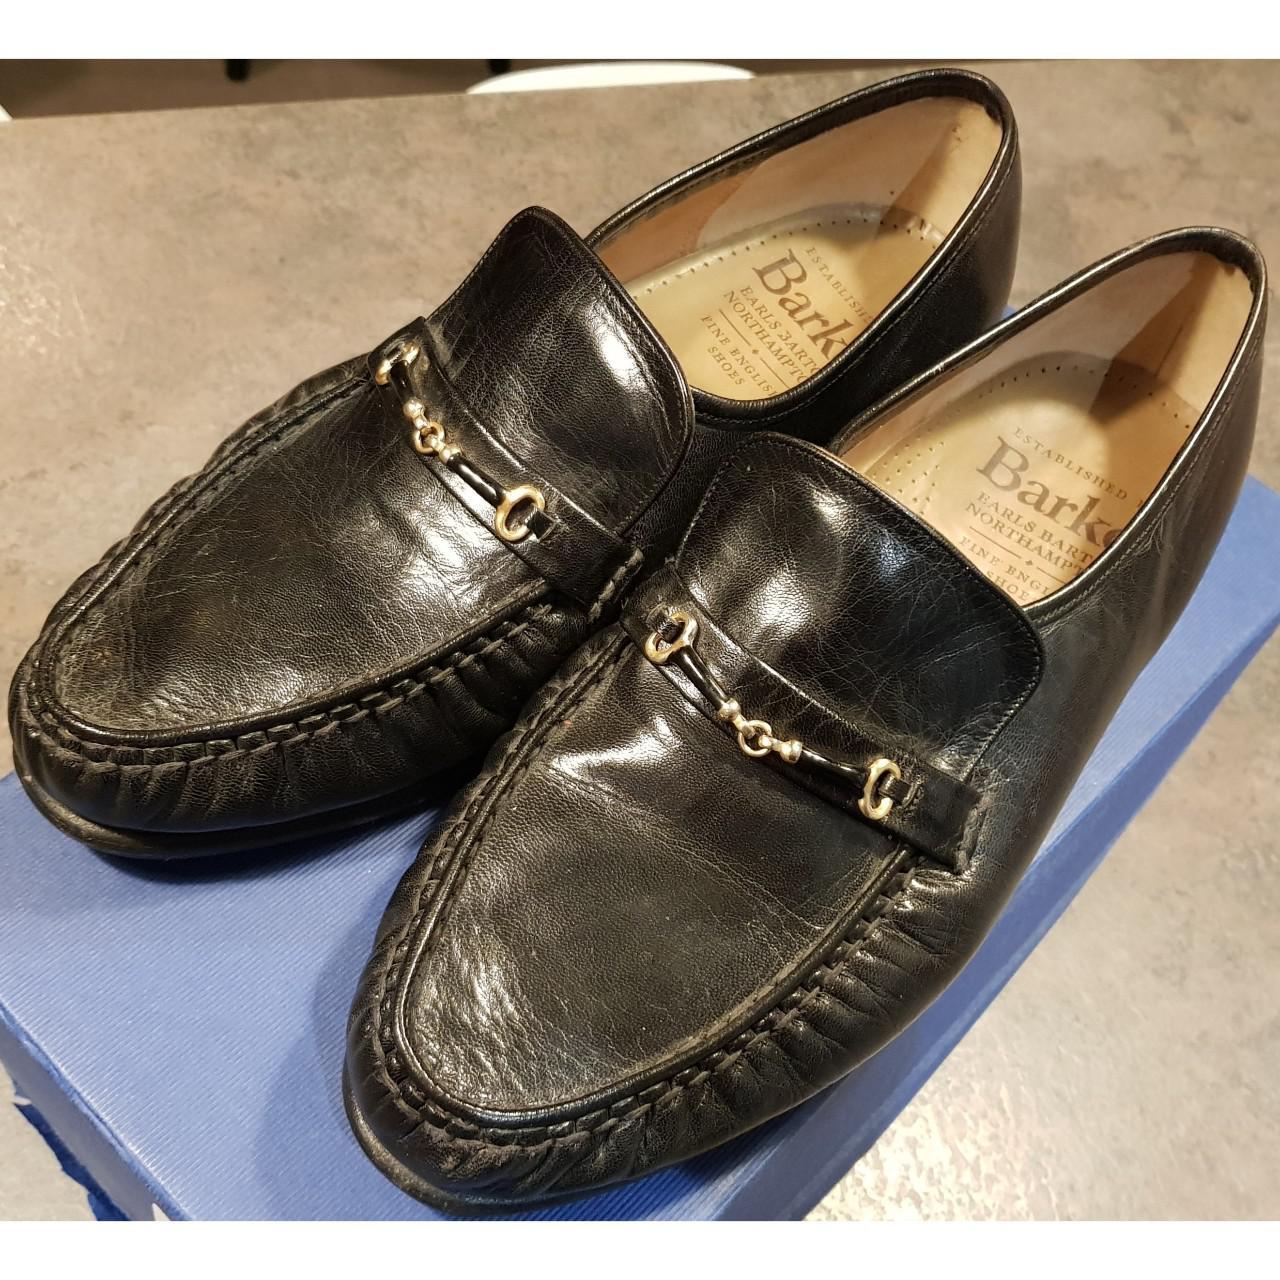 Barker made in England loafers very fine shoes..... - Depop